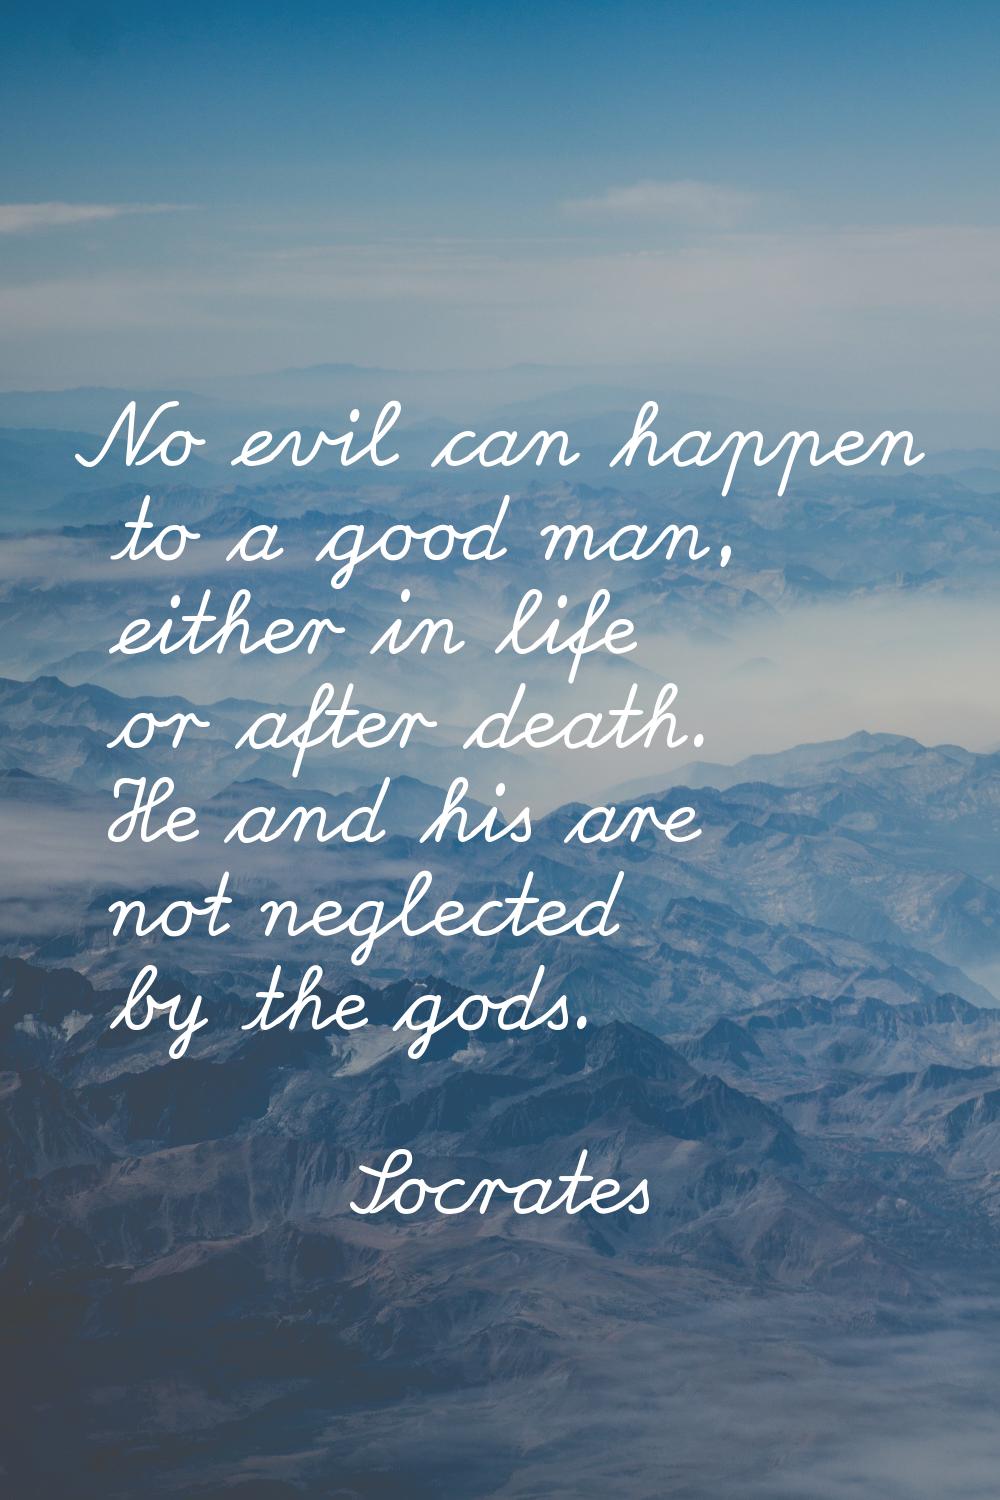 No evil can happen to a good man, either in life or after death. He and his are not neglected by th